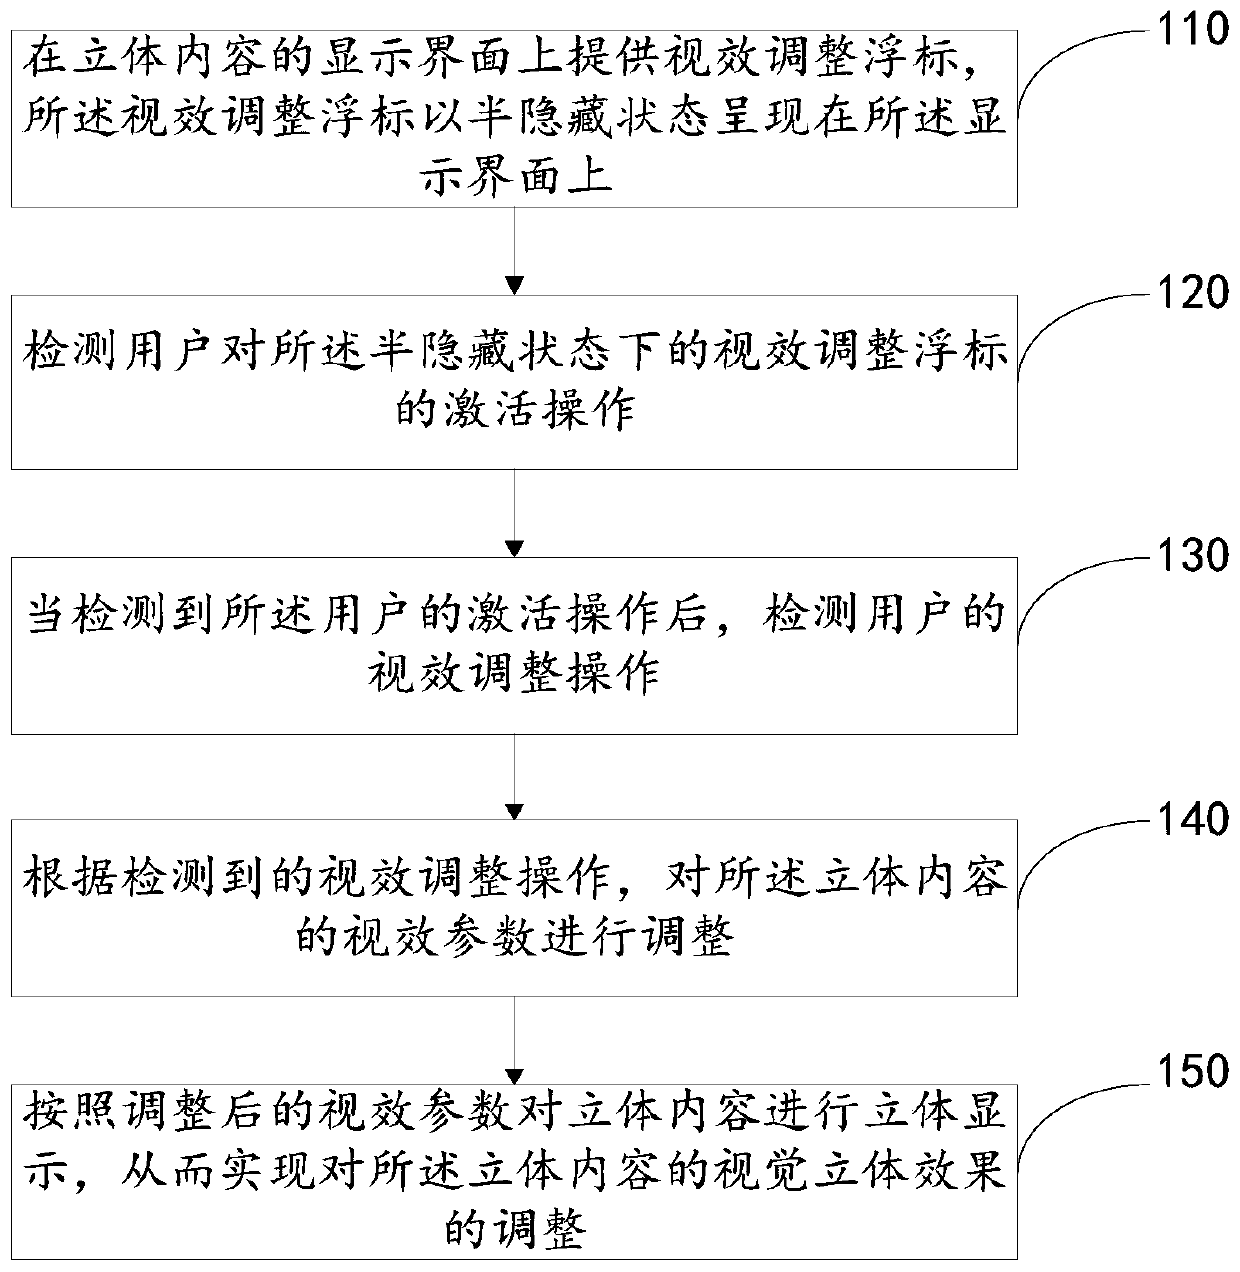 Stereoscopic display control method, device and electronic equipment